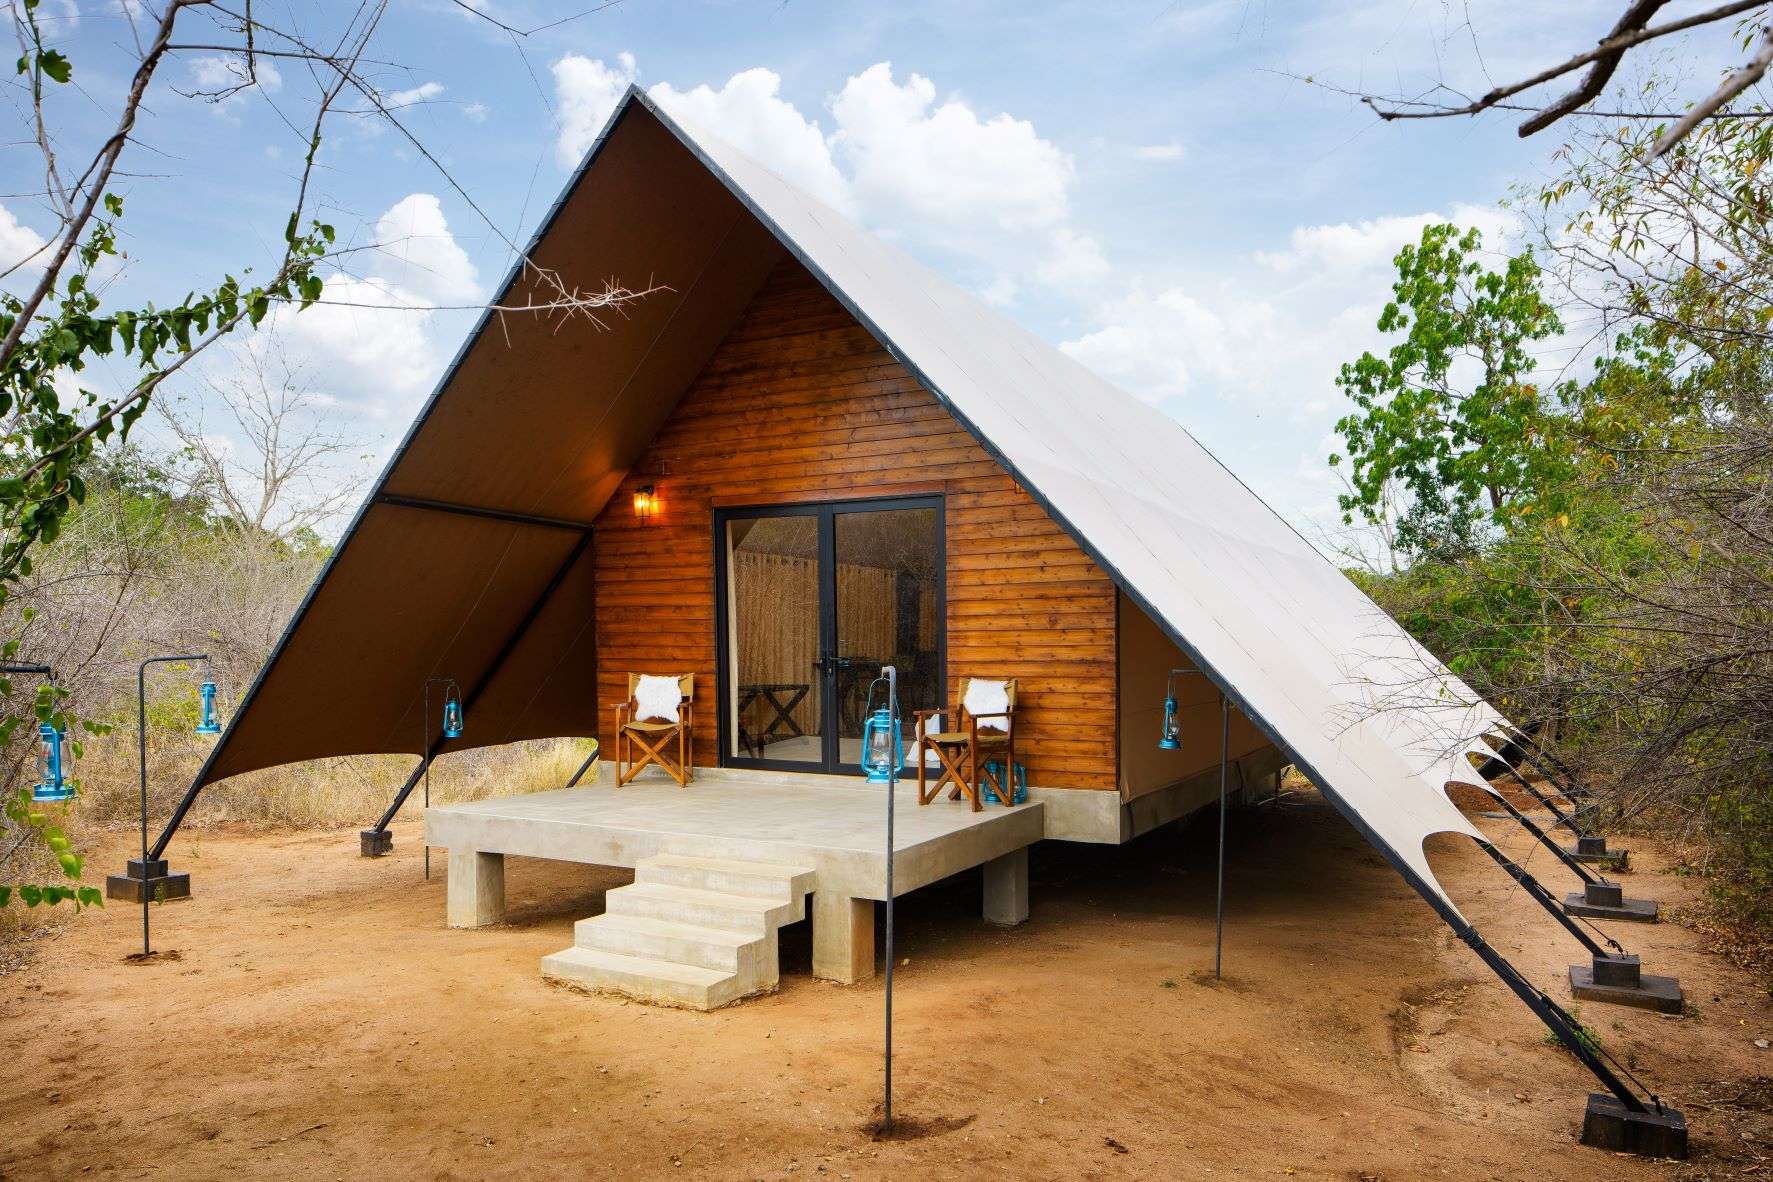 Luxury tented accommodation surrounded by wilderness